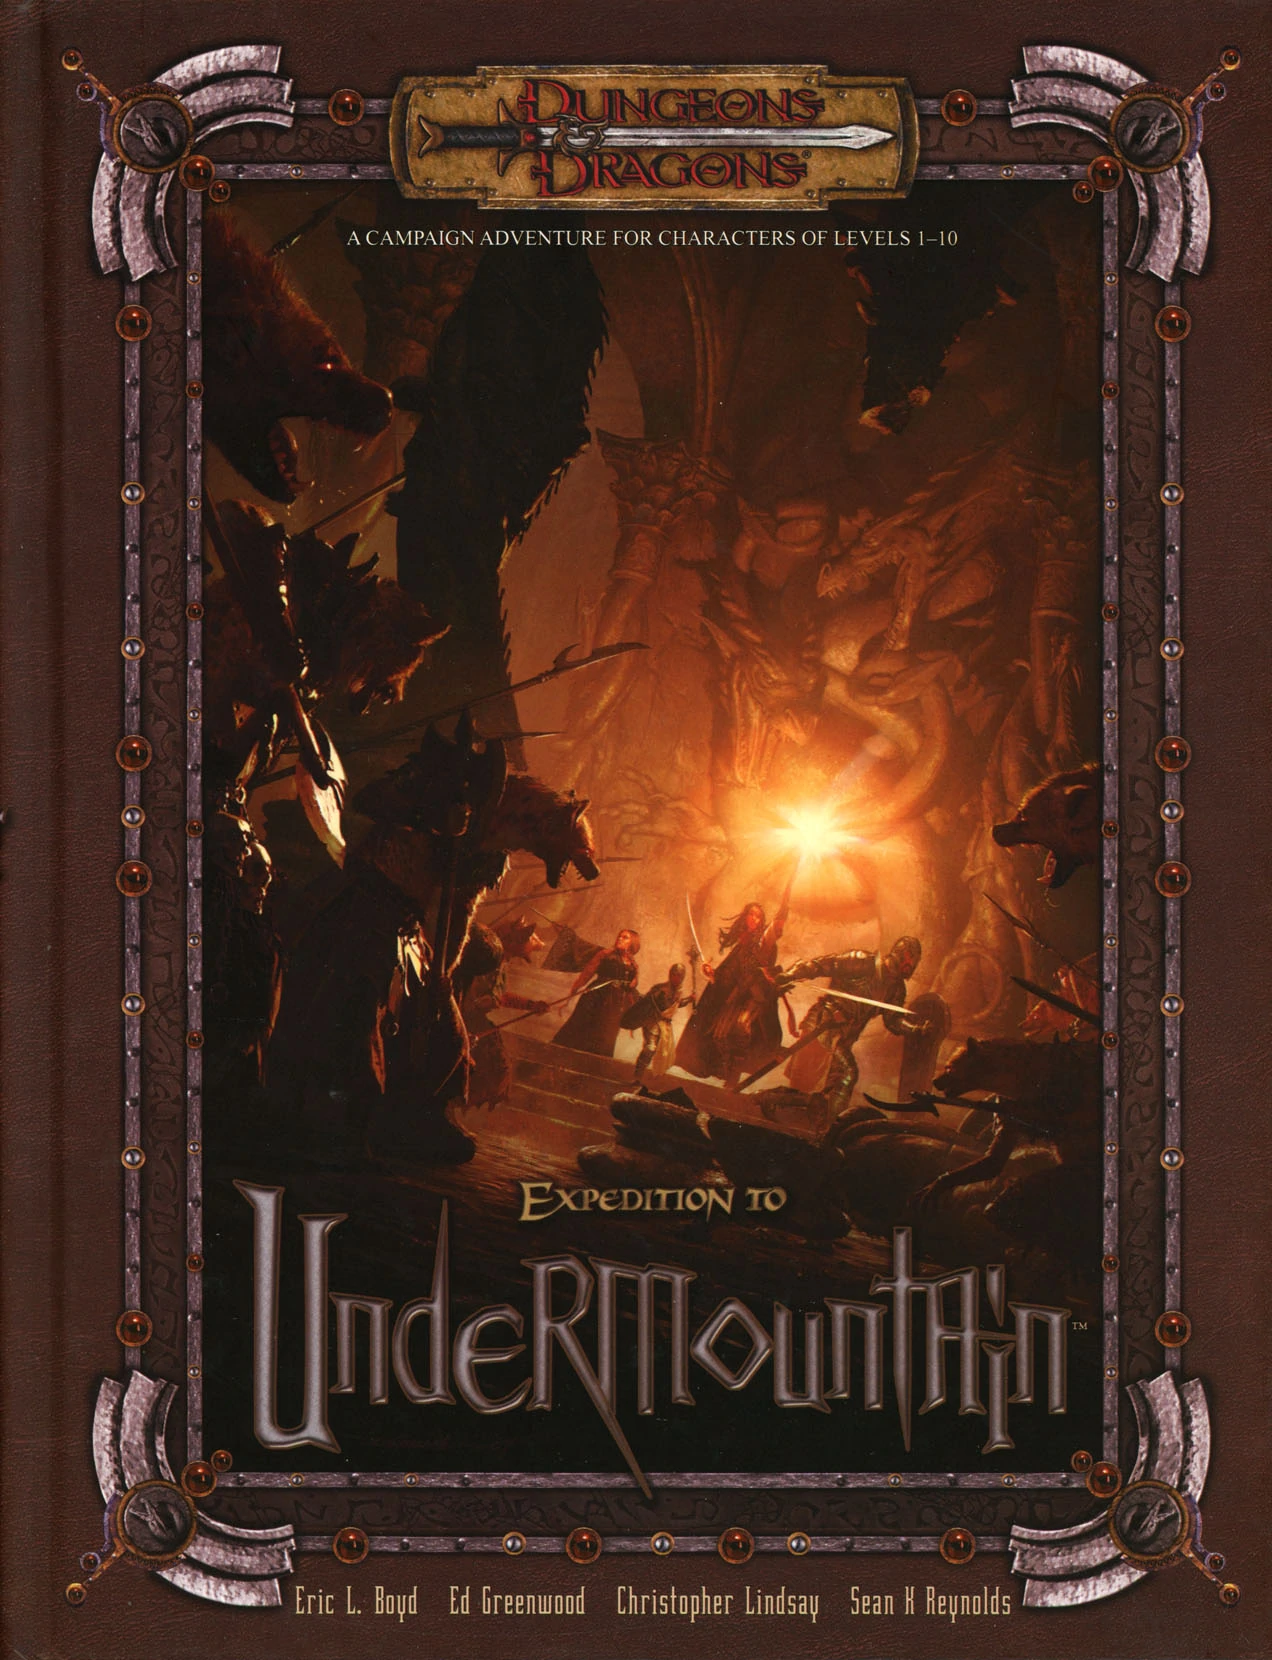 Expedition to Undermountain - Wizards of the Coast